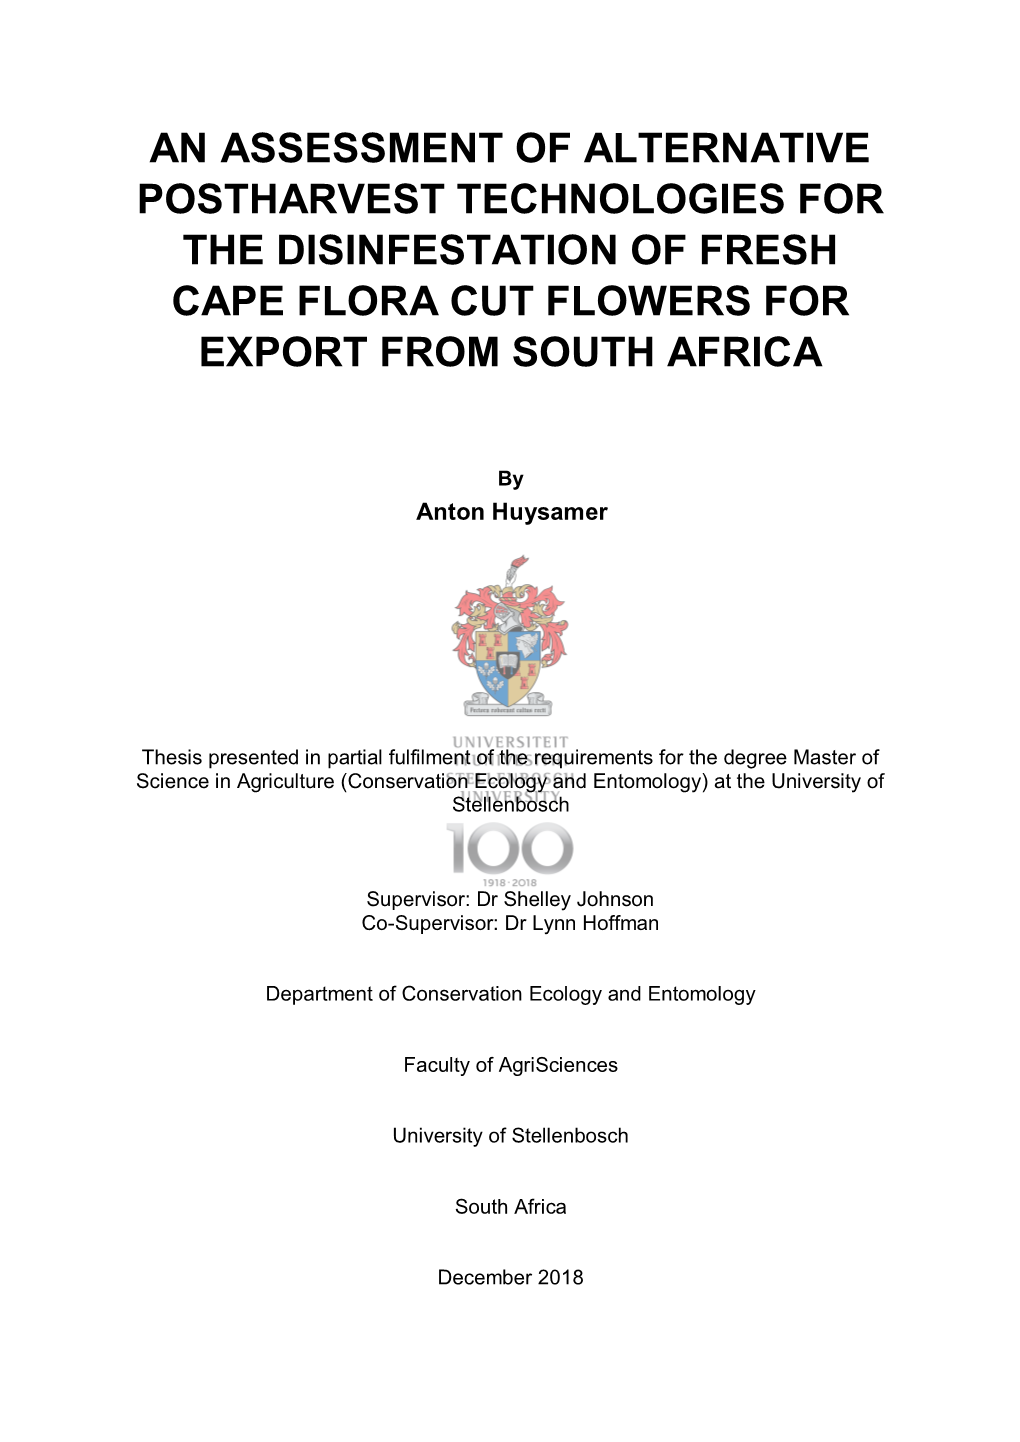 An Assessment of Alternative Postharvest Technologies for the Disinfestation of Fresh Cape Flora Cut Flowers for Export from South Africa